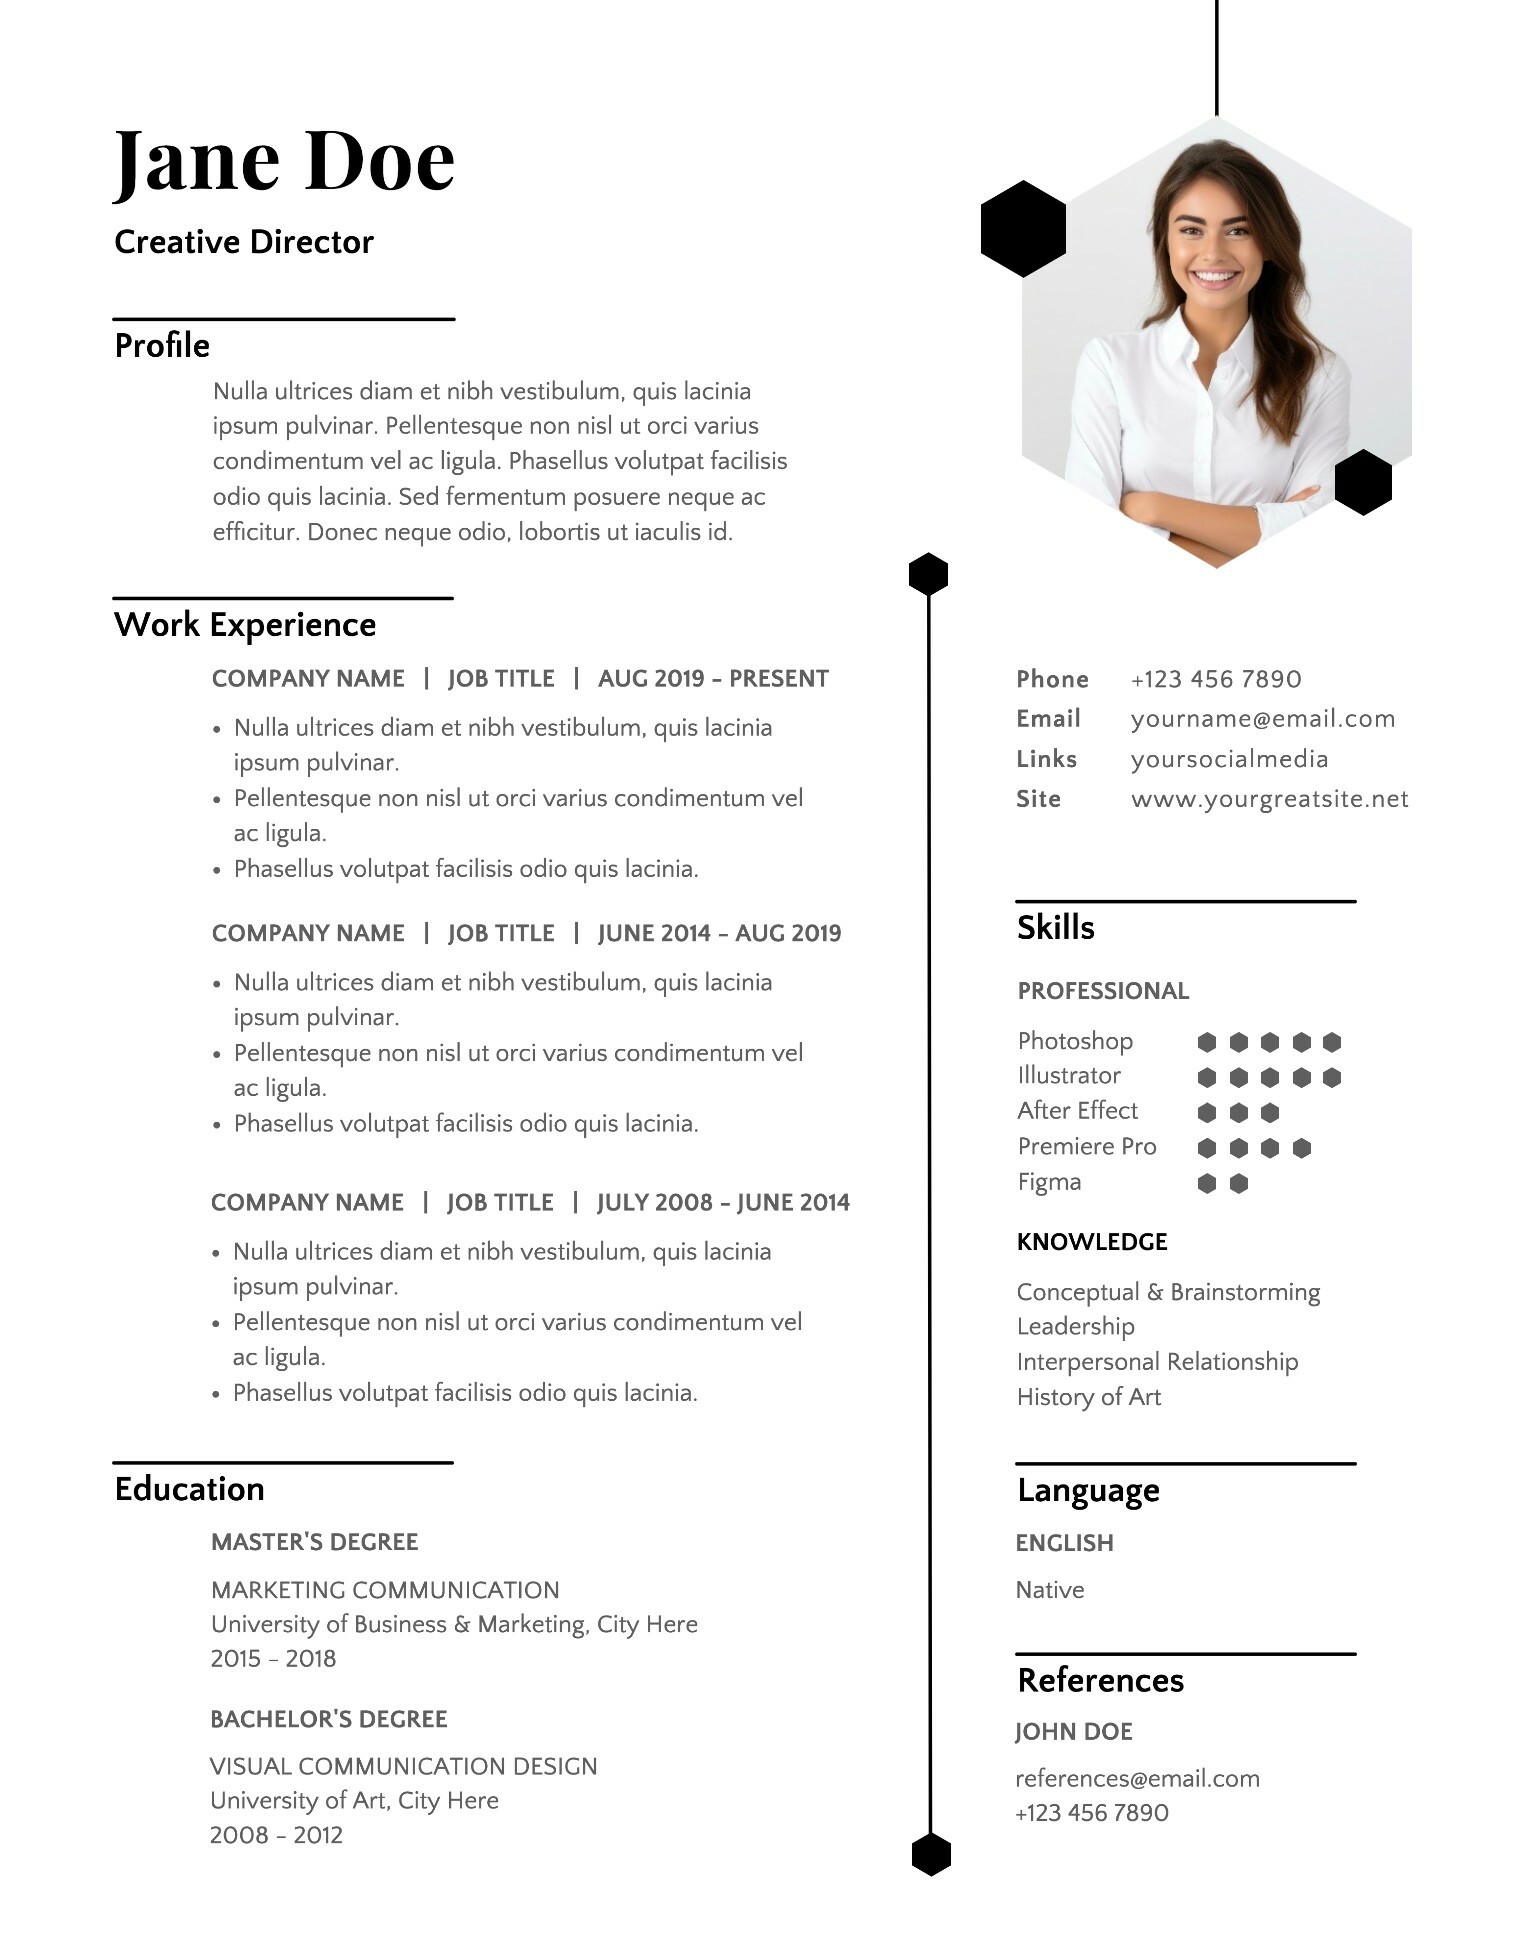 Resume with Minimalist Style in Black and White